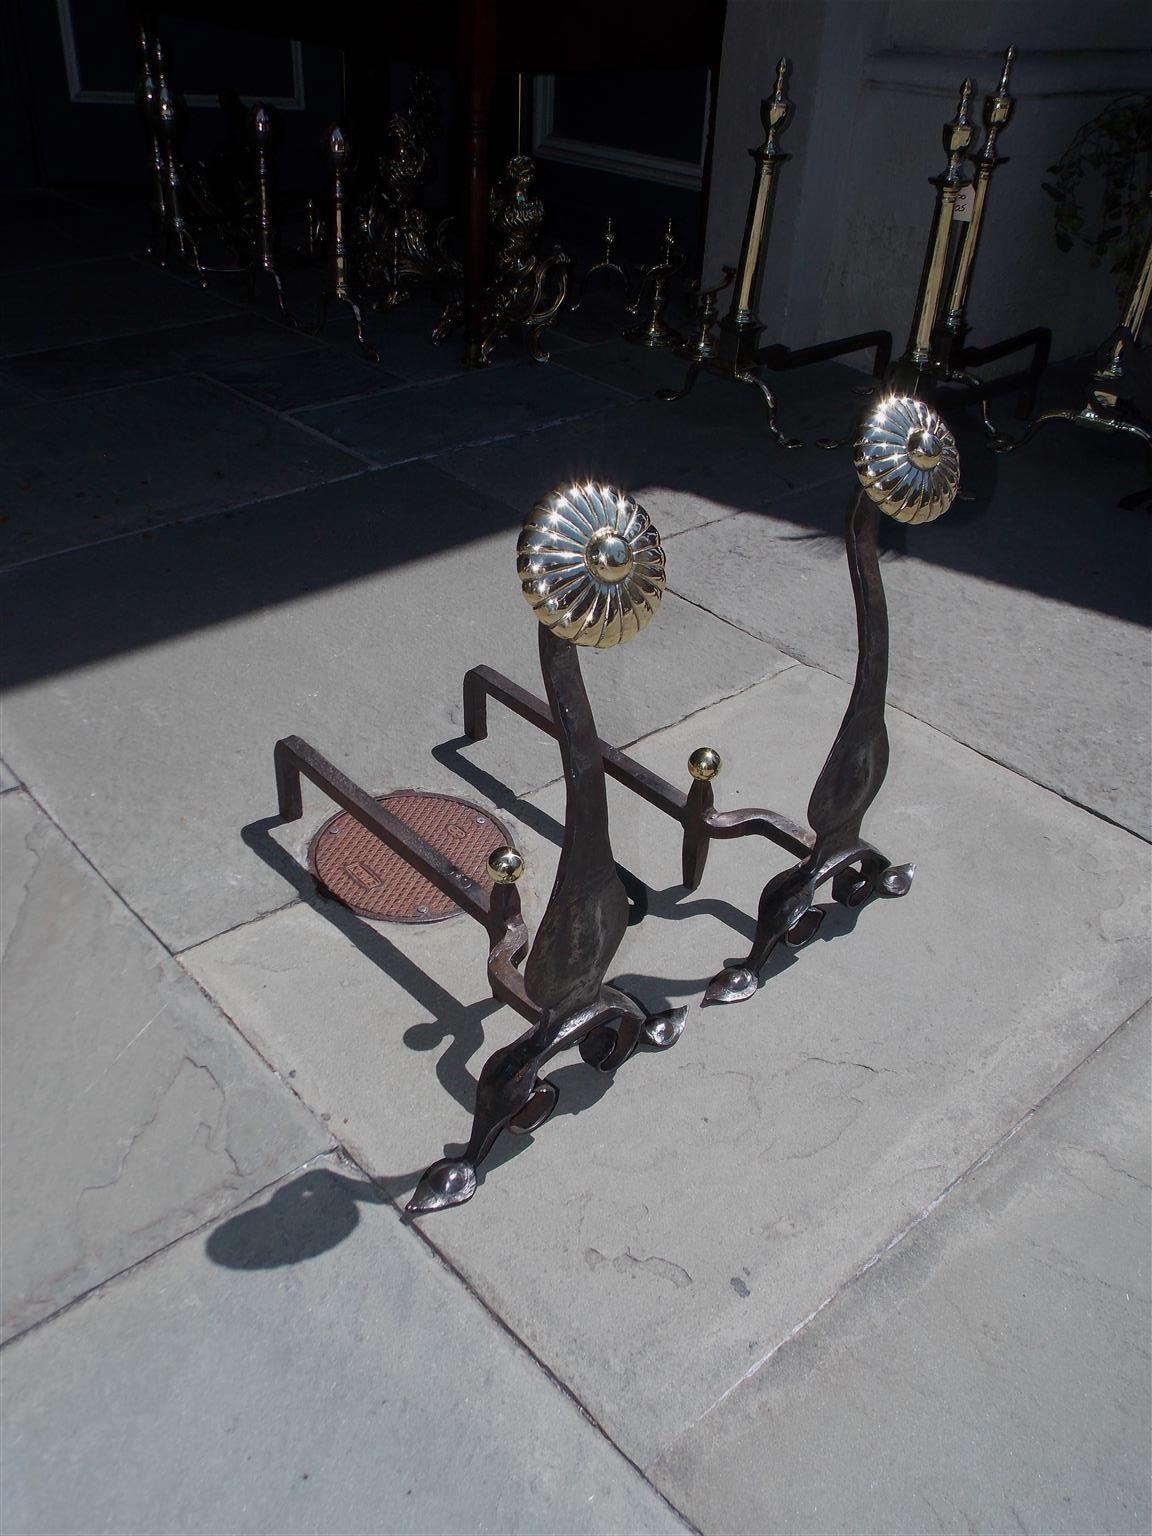 Pair of American brass melon medallion and wrought iron andirons with matching brass ball finial log stops, decorative bulbous squared plinths, and terminating on scrolled stylized spade penny feet, Mid-19th century.